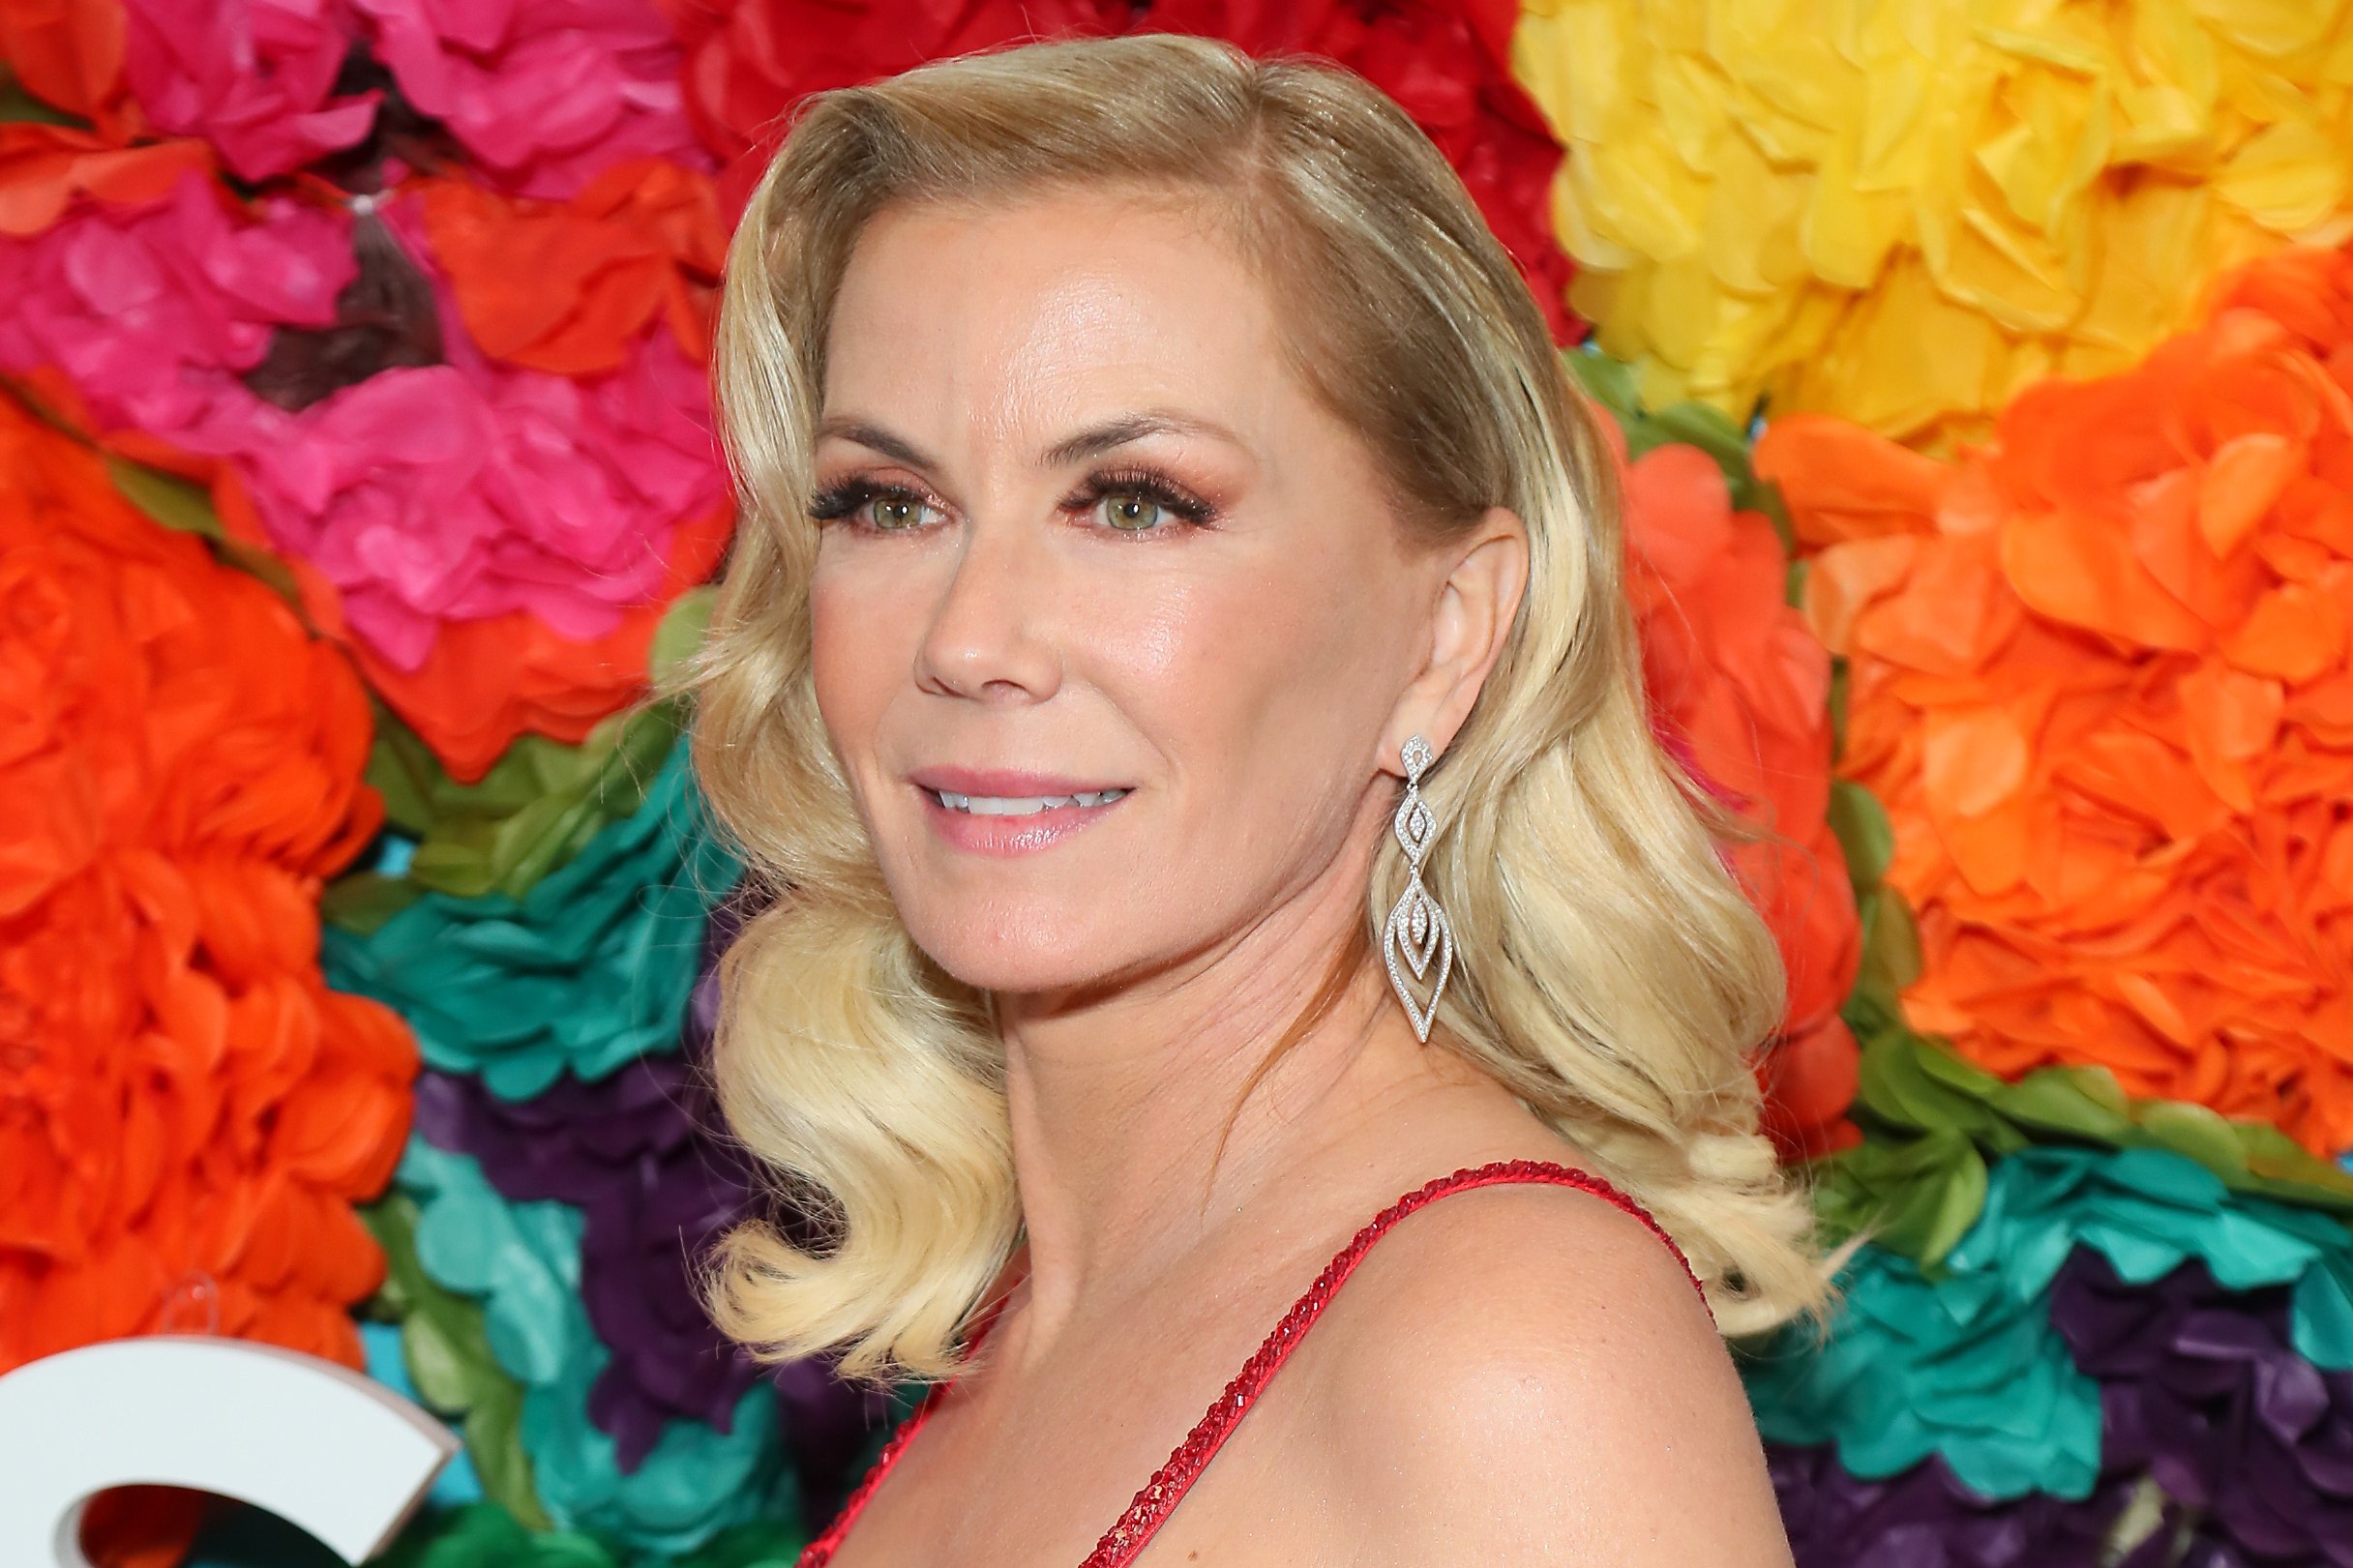 'The Bold and the Beautiful' actor Katherine Kelly Lang wearing a red dress and standing in front of a floral background.